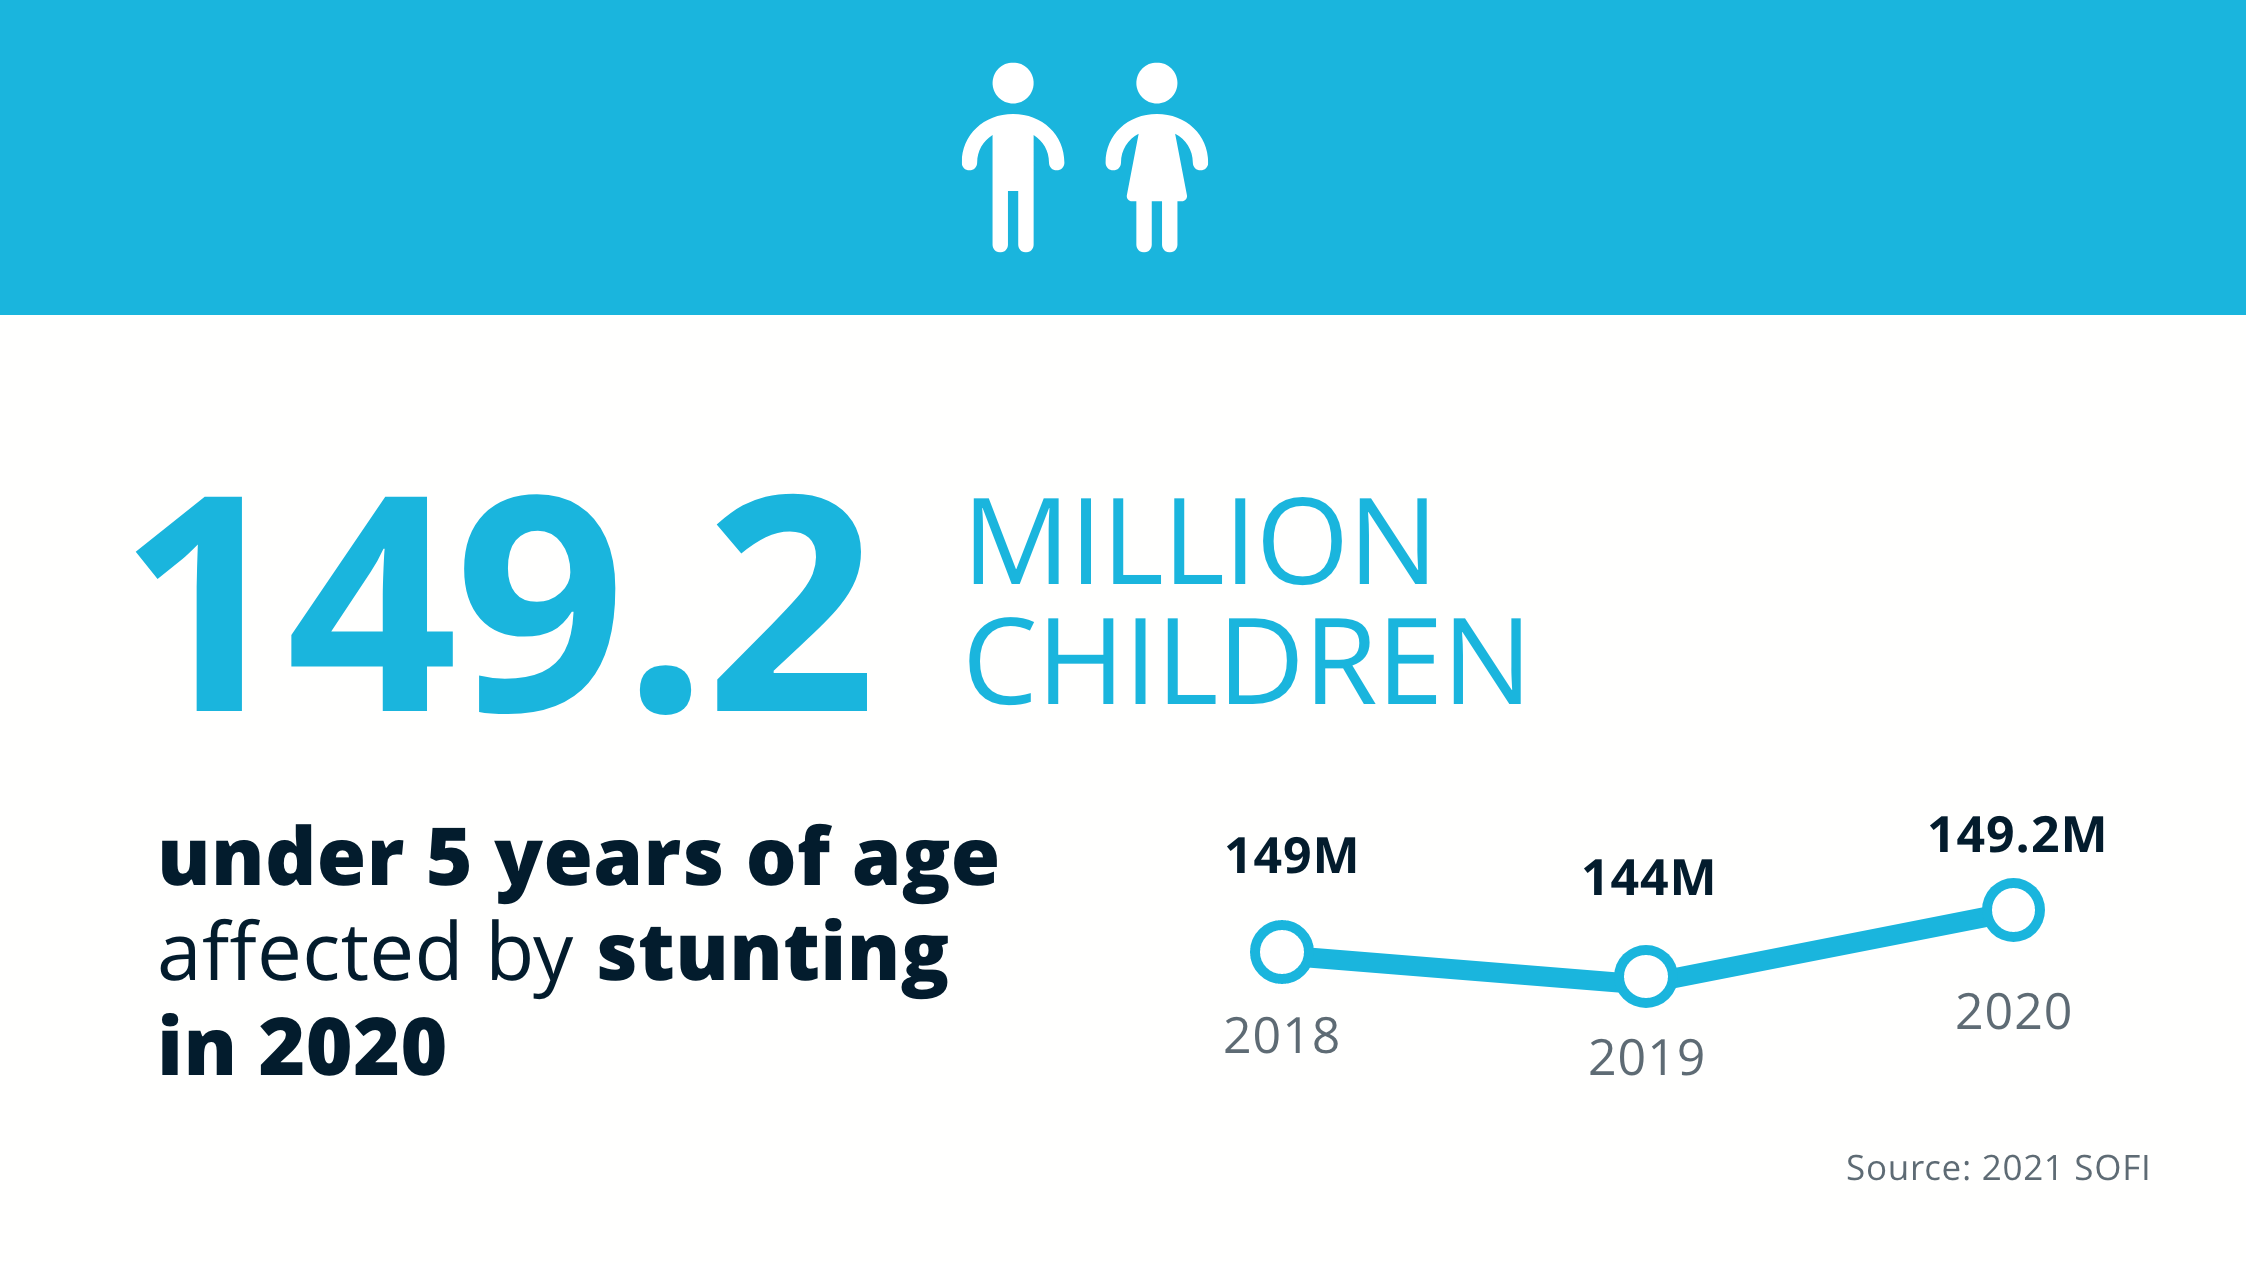 149.2 million children under 5 years of age affected by stunting in 2020